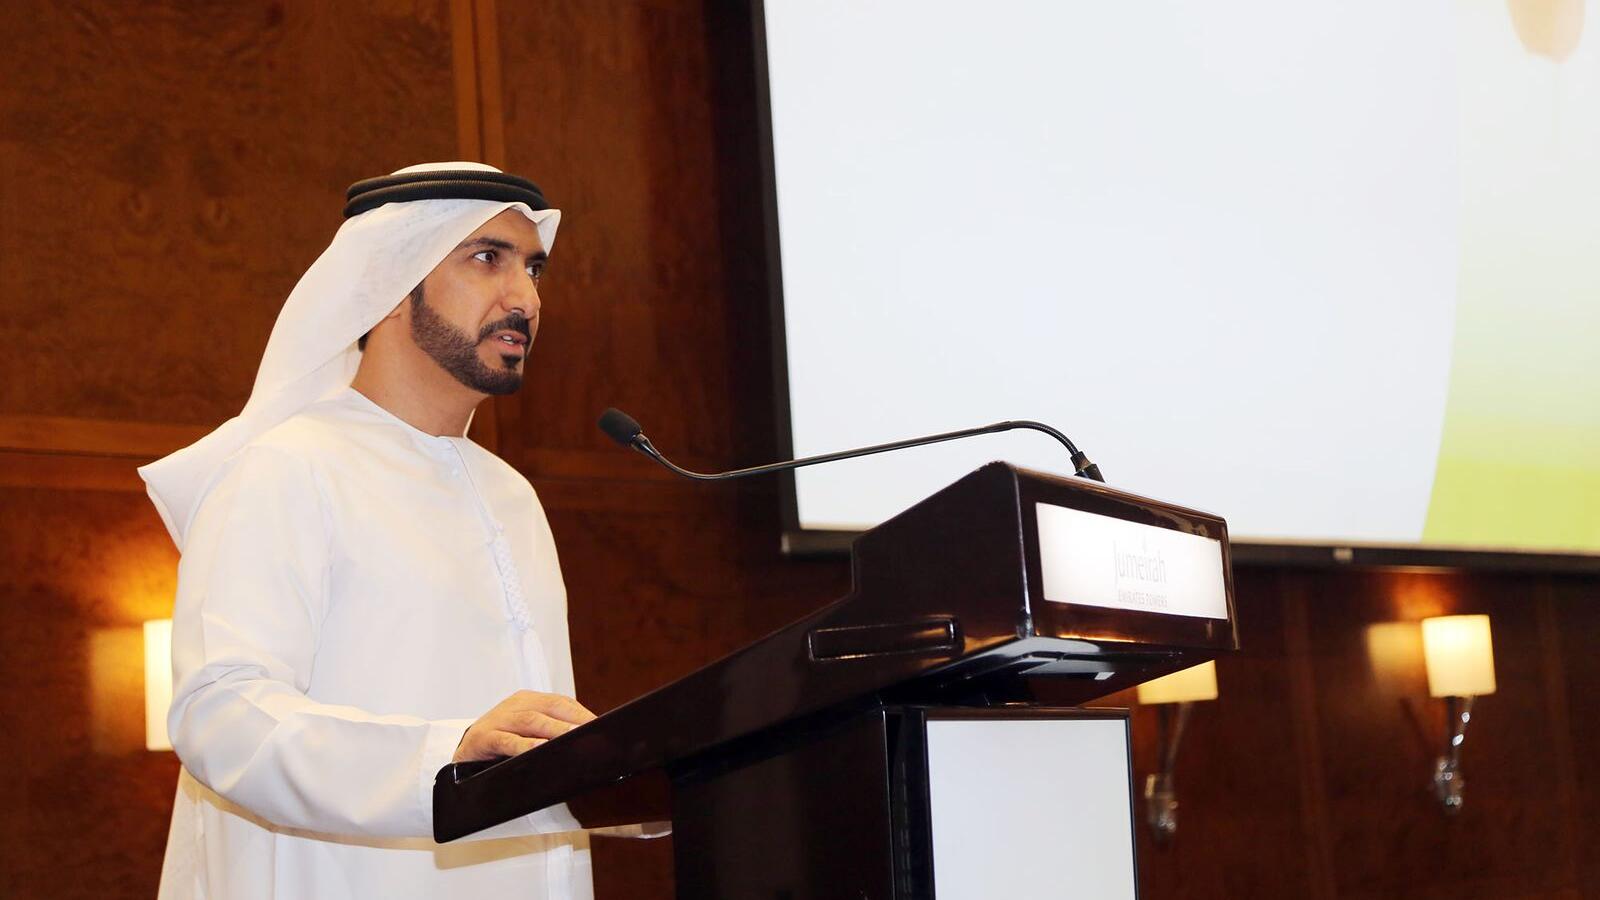 Empowering patients in UAE: DHA discusses Dubai Digital Health Strategy with more than 100 key stakeholders - News